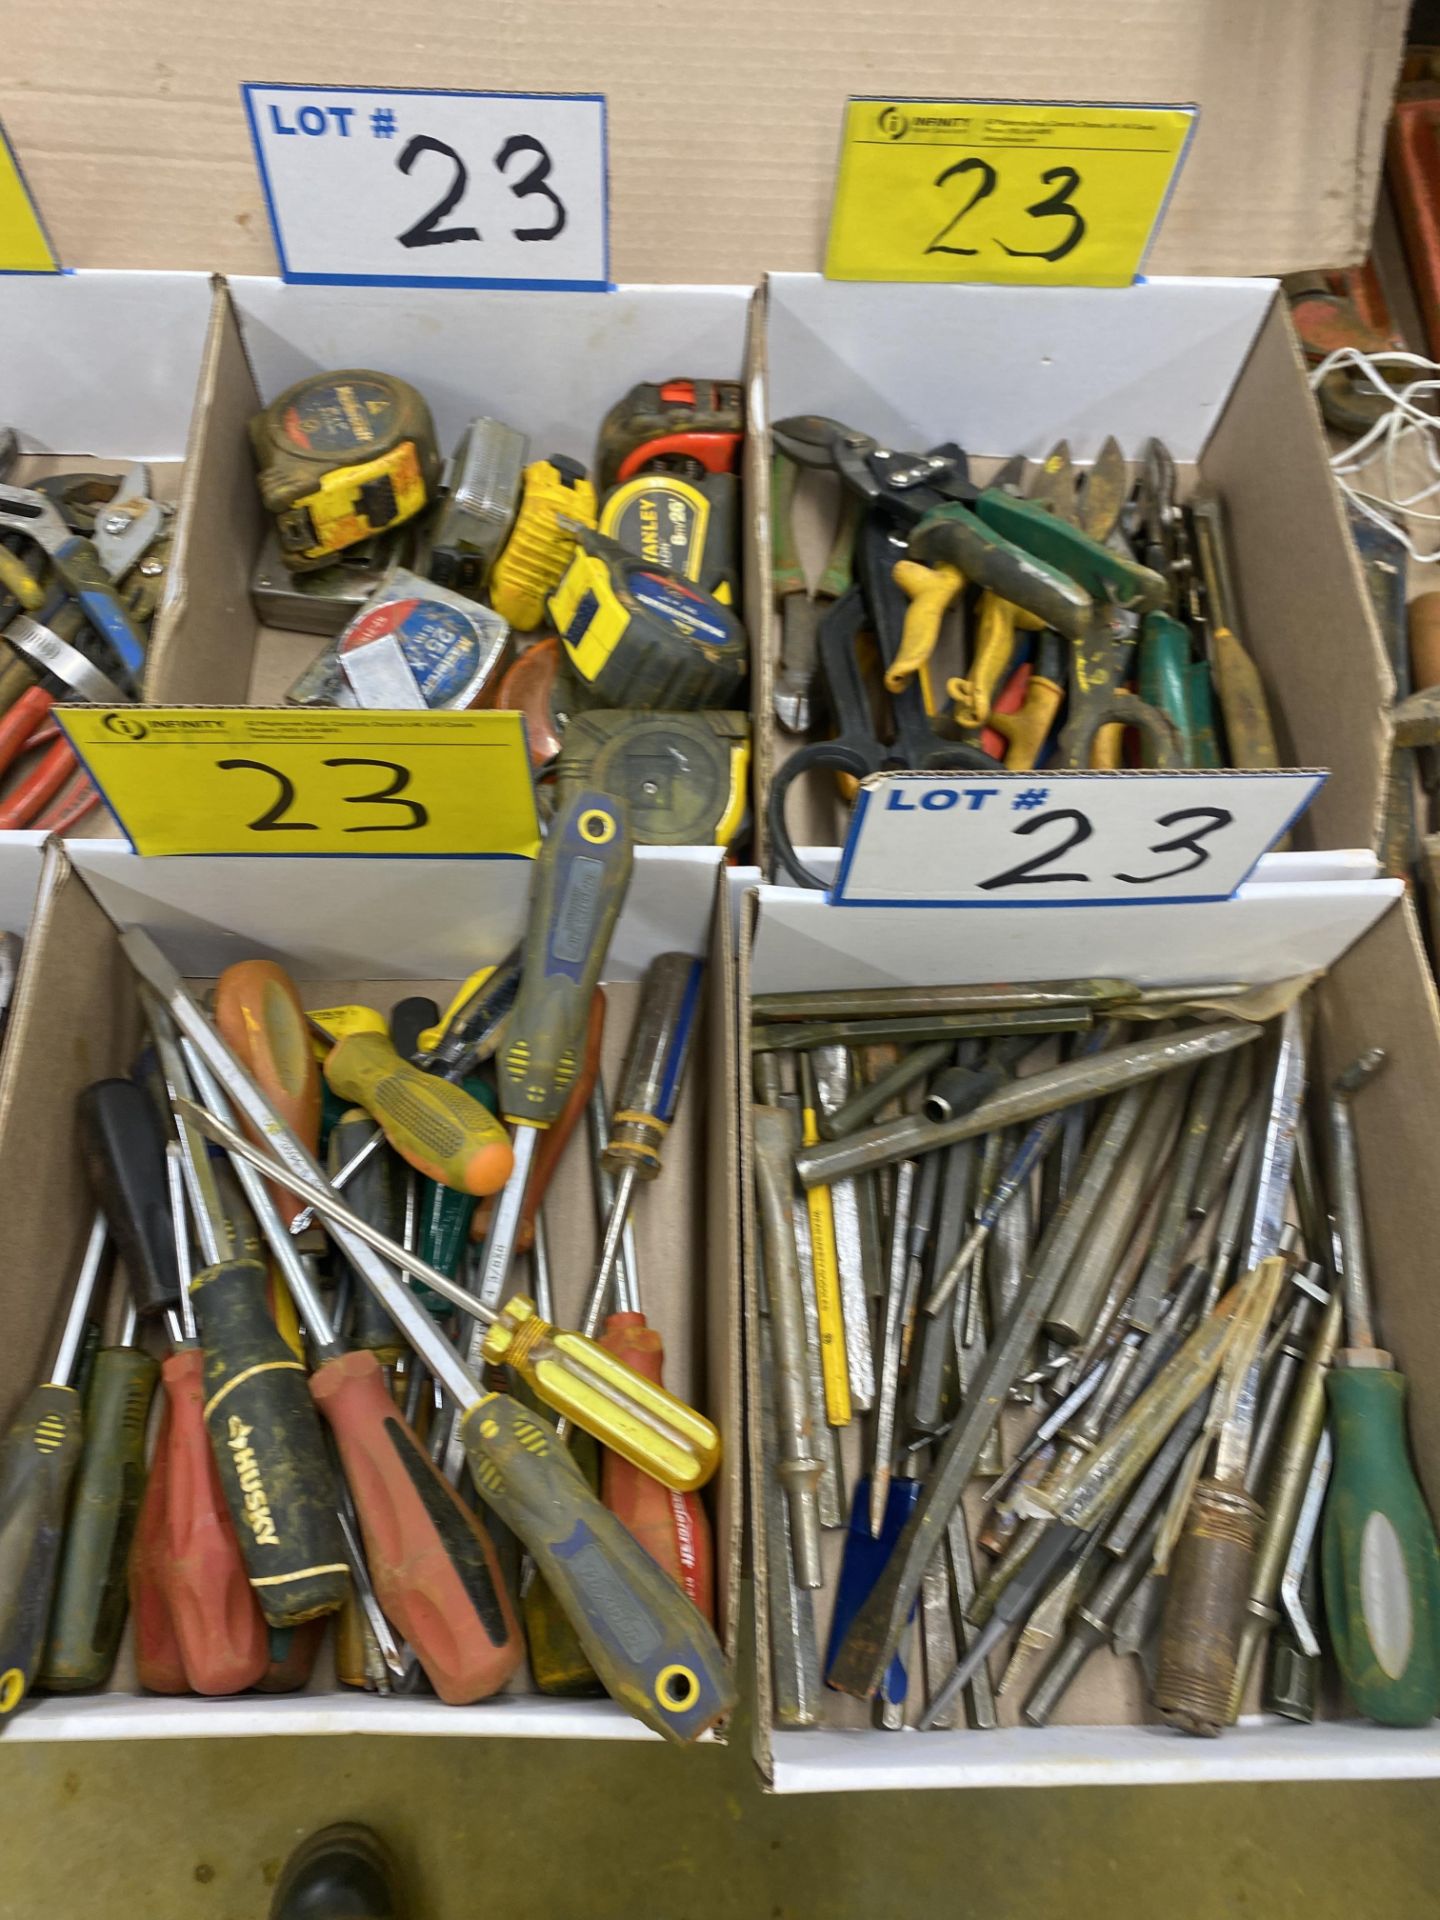 LOT OF (6) BOXES OF PLIERS, DRIVERS, CHANNEL LOCKS, MEASURING TAPES, PUNCHES, CUTTERS - Image 2 of 3